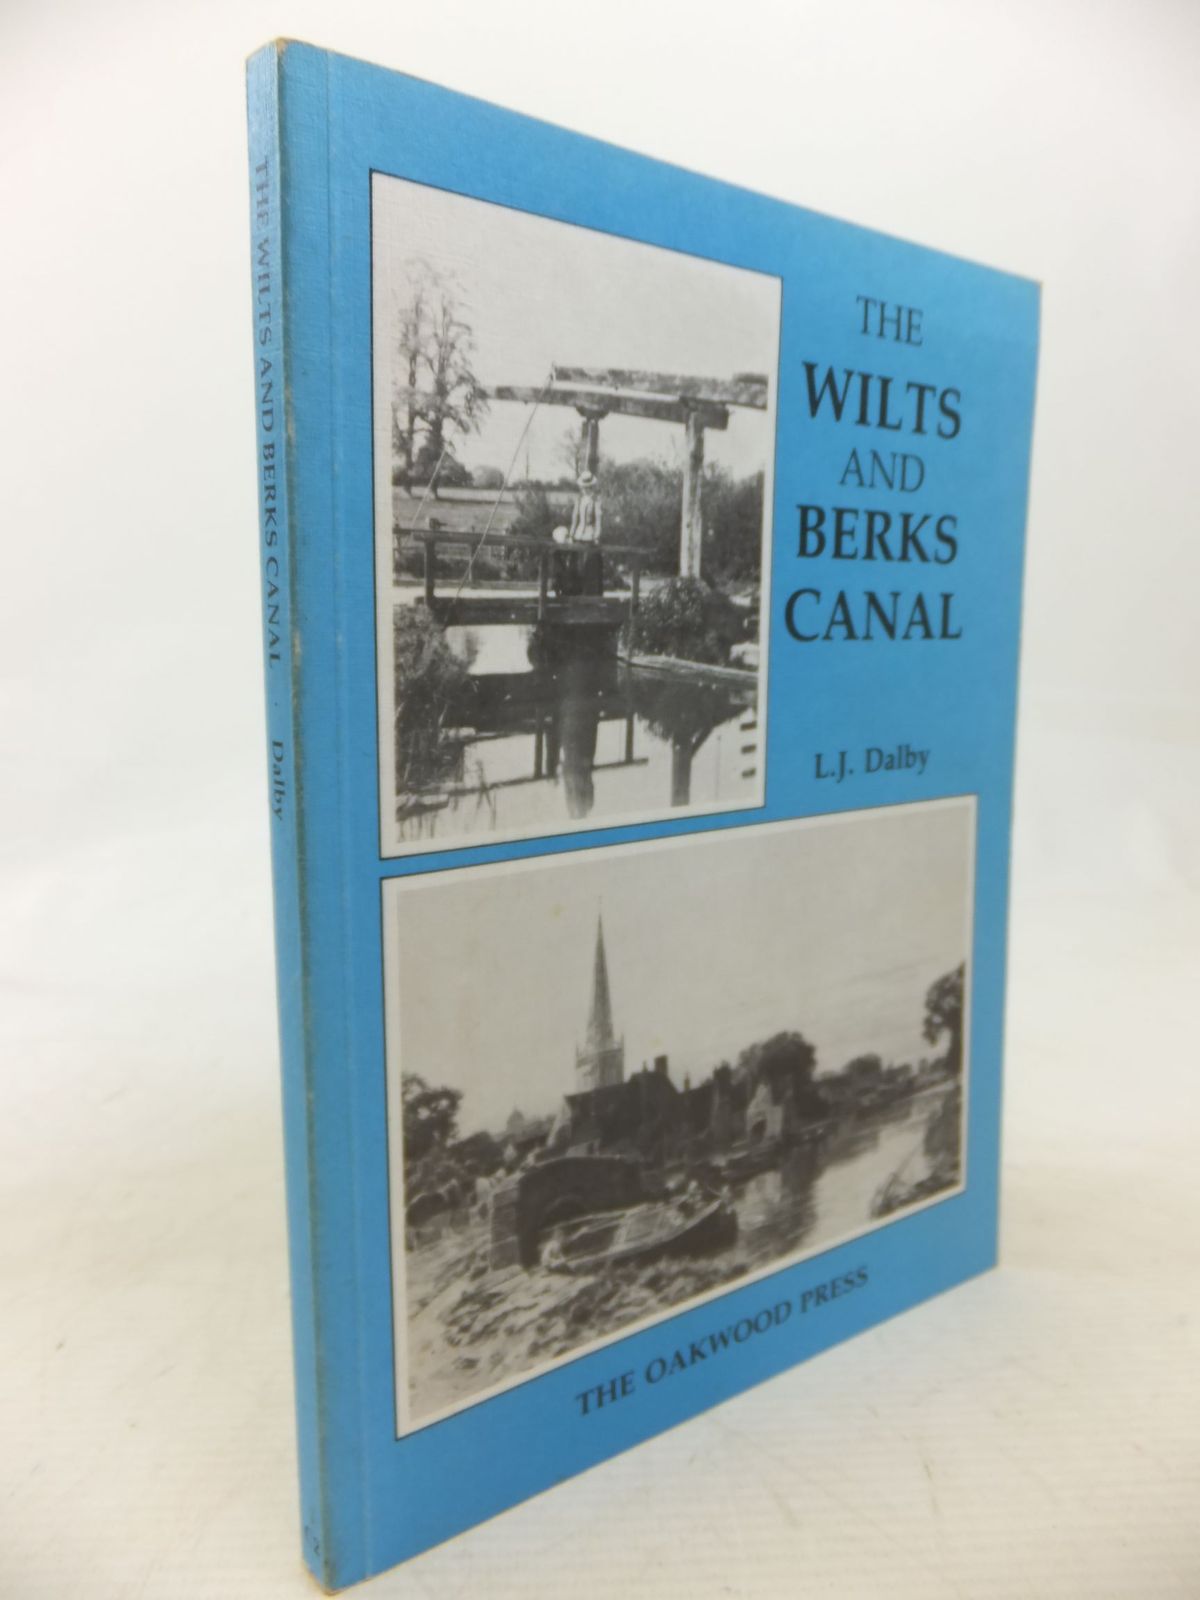 Photo of THE WILTS AND BERKS CANAL written by Dalby, L.J. published by The Oakwood Press (STOCK CODE: 2115159)  for sale by Stella & Rose's Books